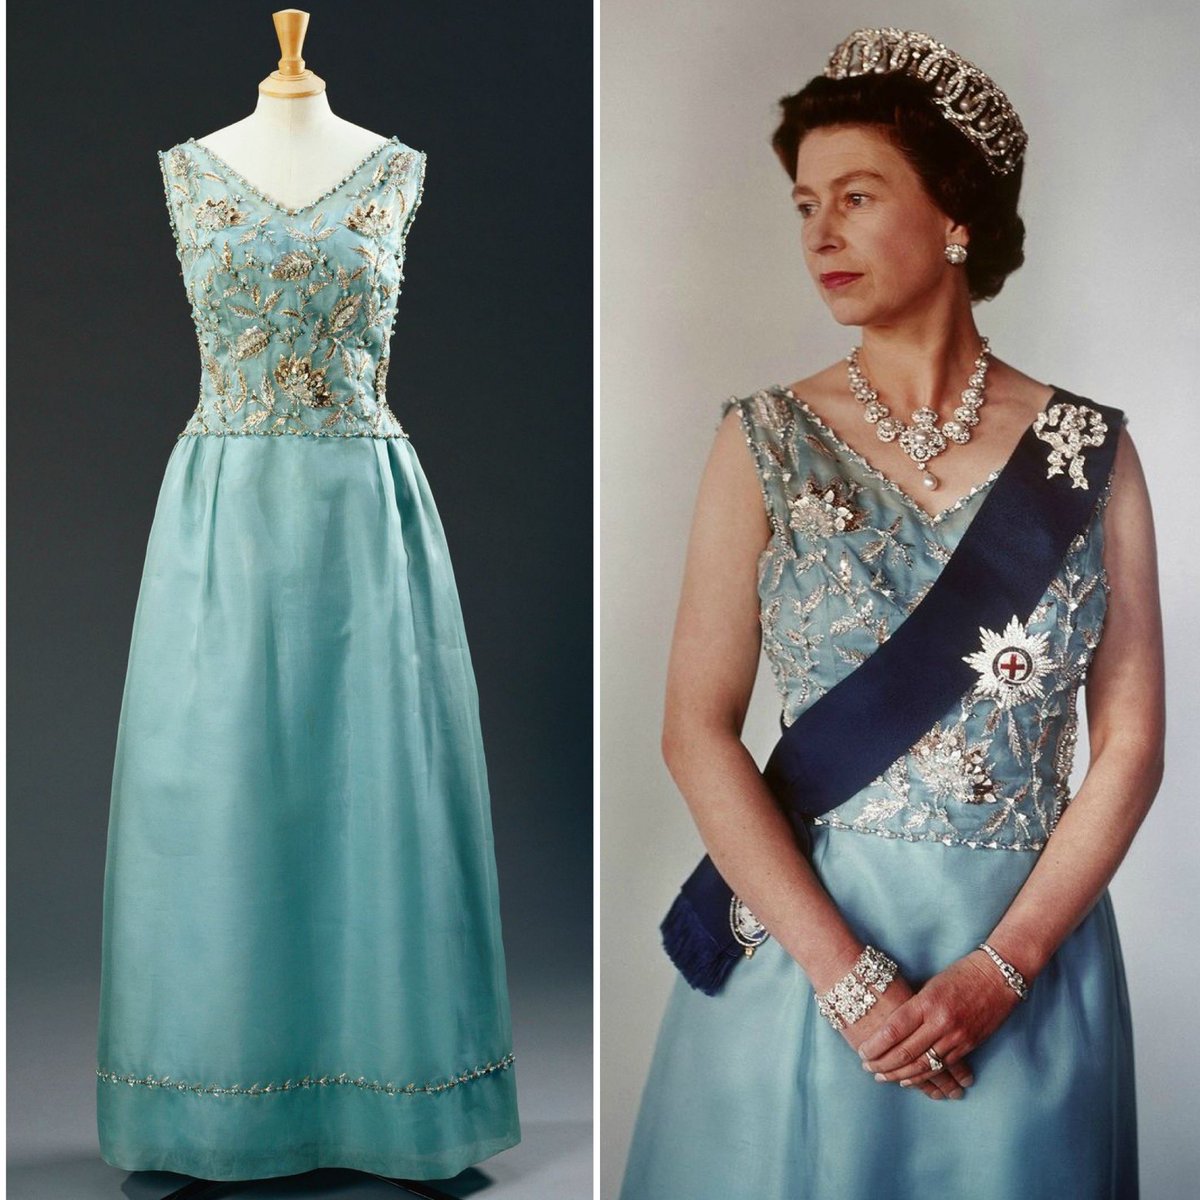 Hardy Amies’s autobiography Still Here is a fascinating account of a life in fashion that began with his mother’s work for an Edwardian couturier & culminated in his designs for the Queen. Whilst known for his tailoring, this 1965 gown showcases his more dramatic ensembles @RCT